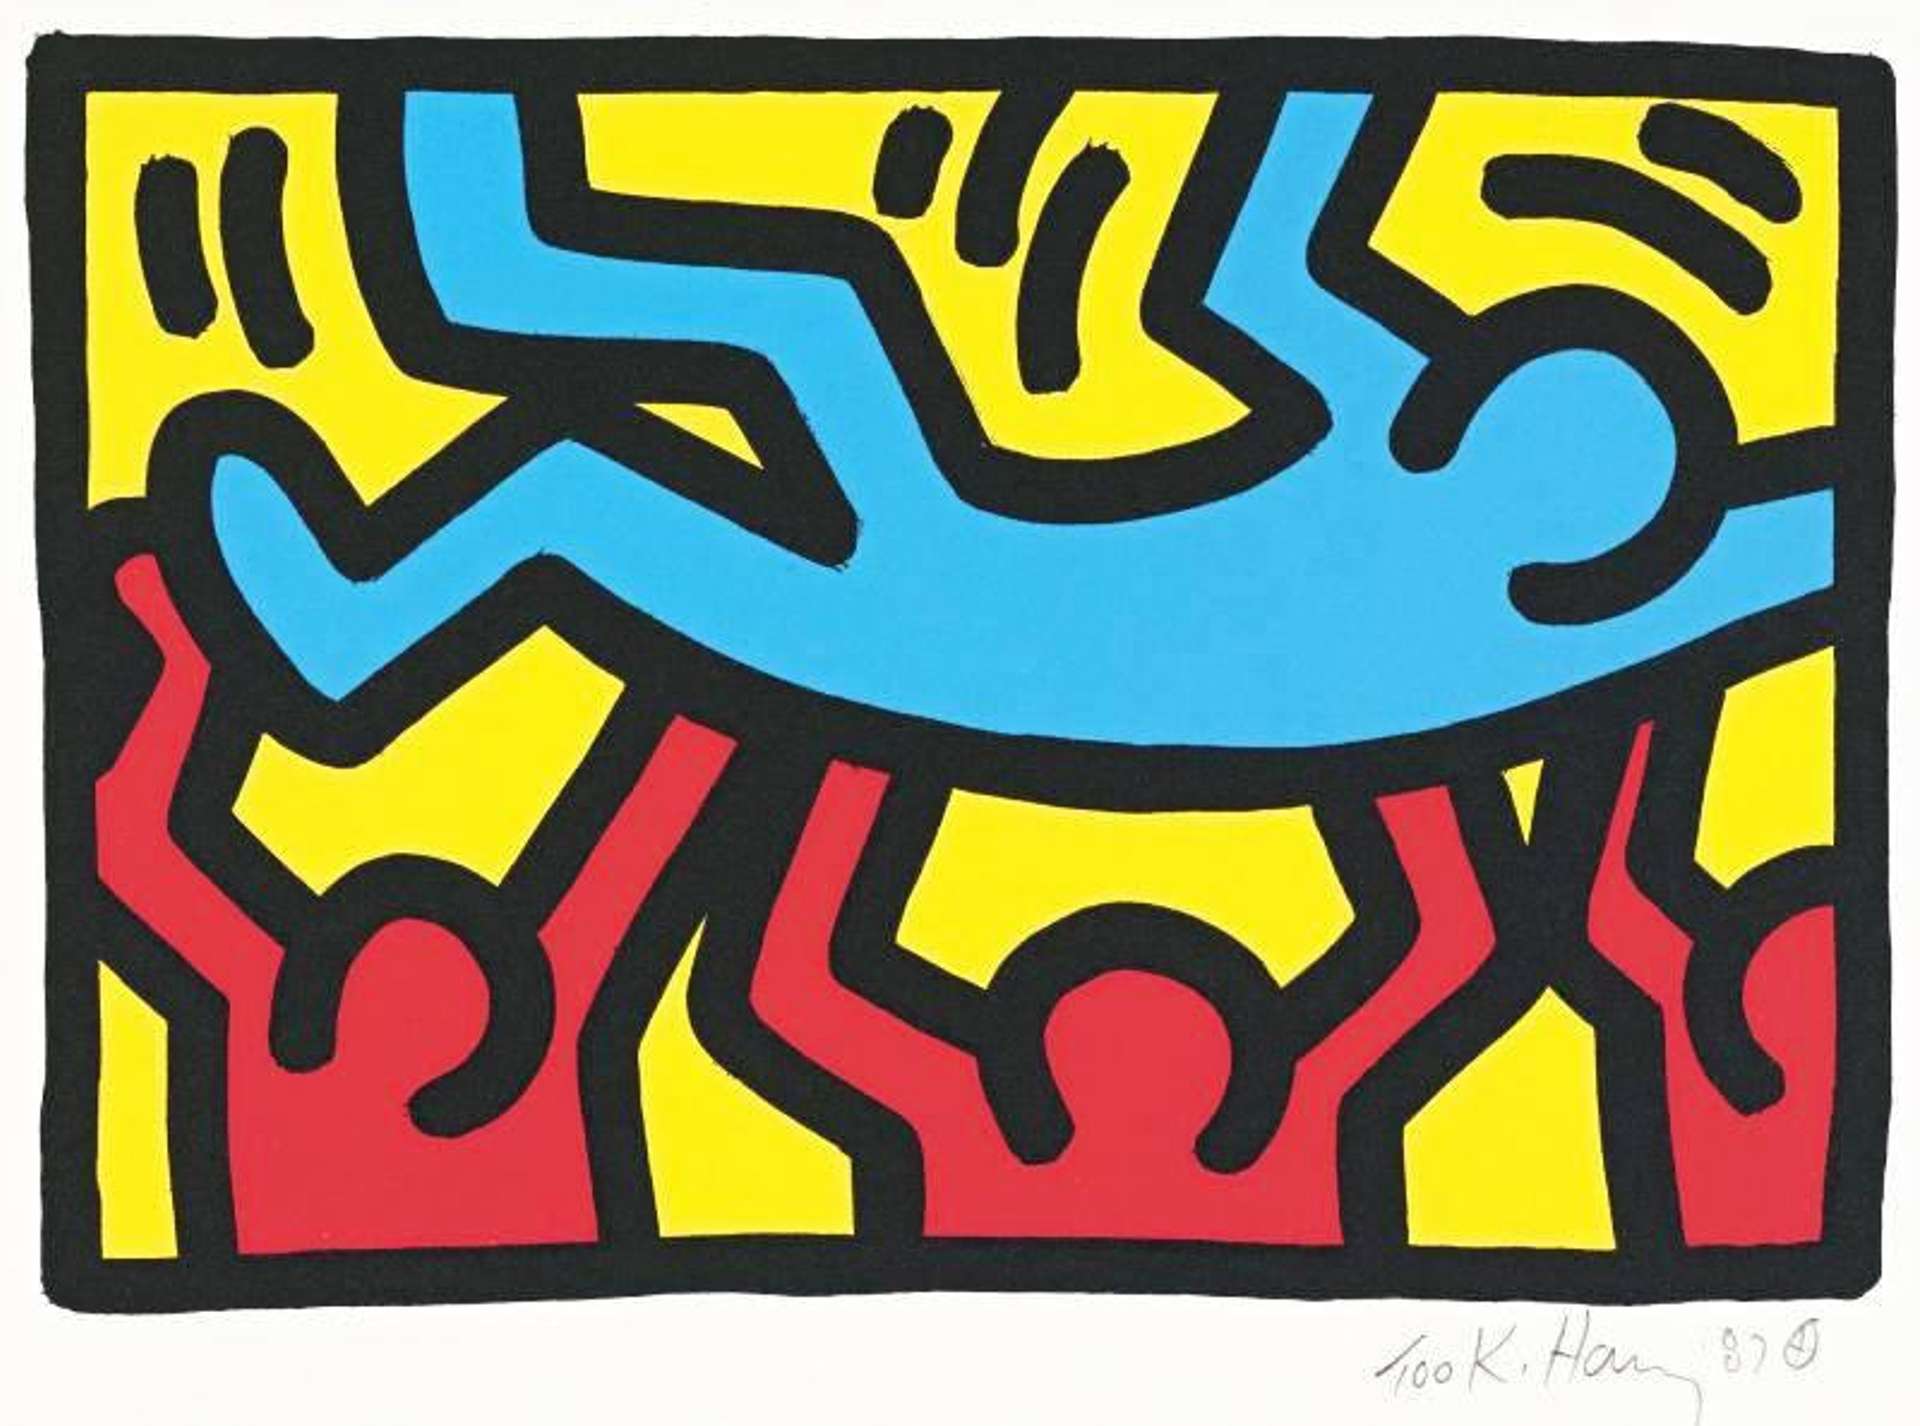 Keith Haring: Untitled 1987 - Signed Print